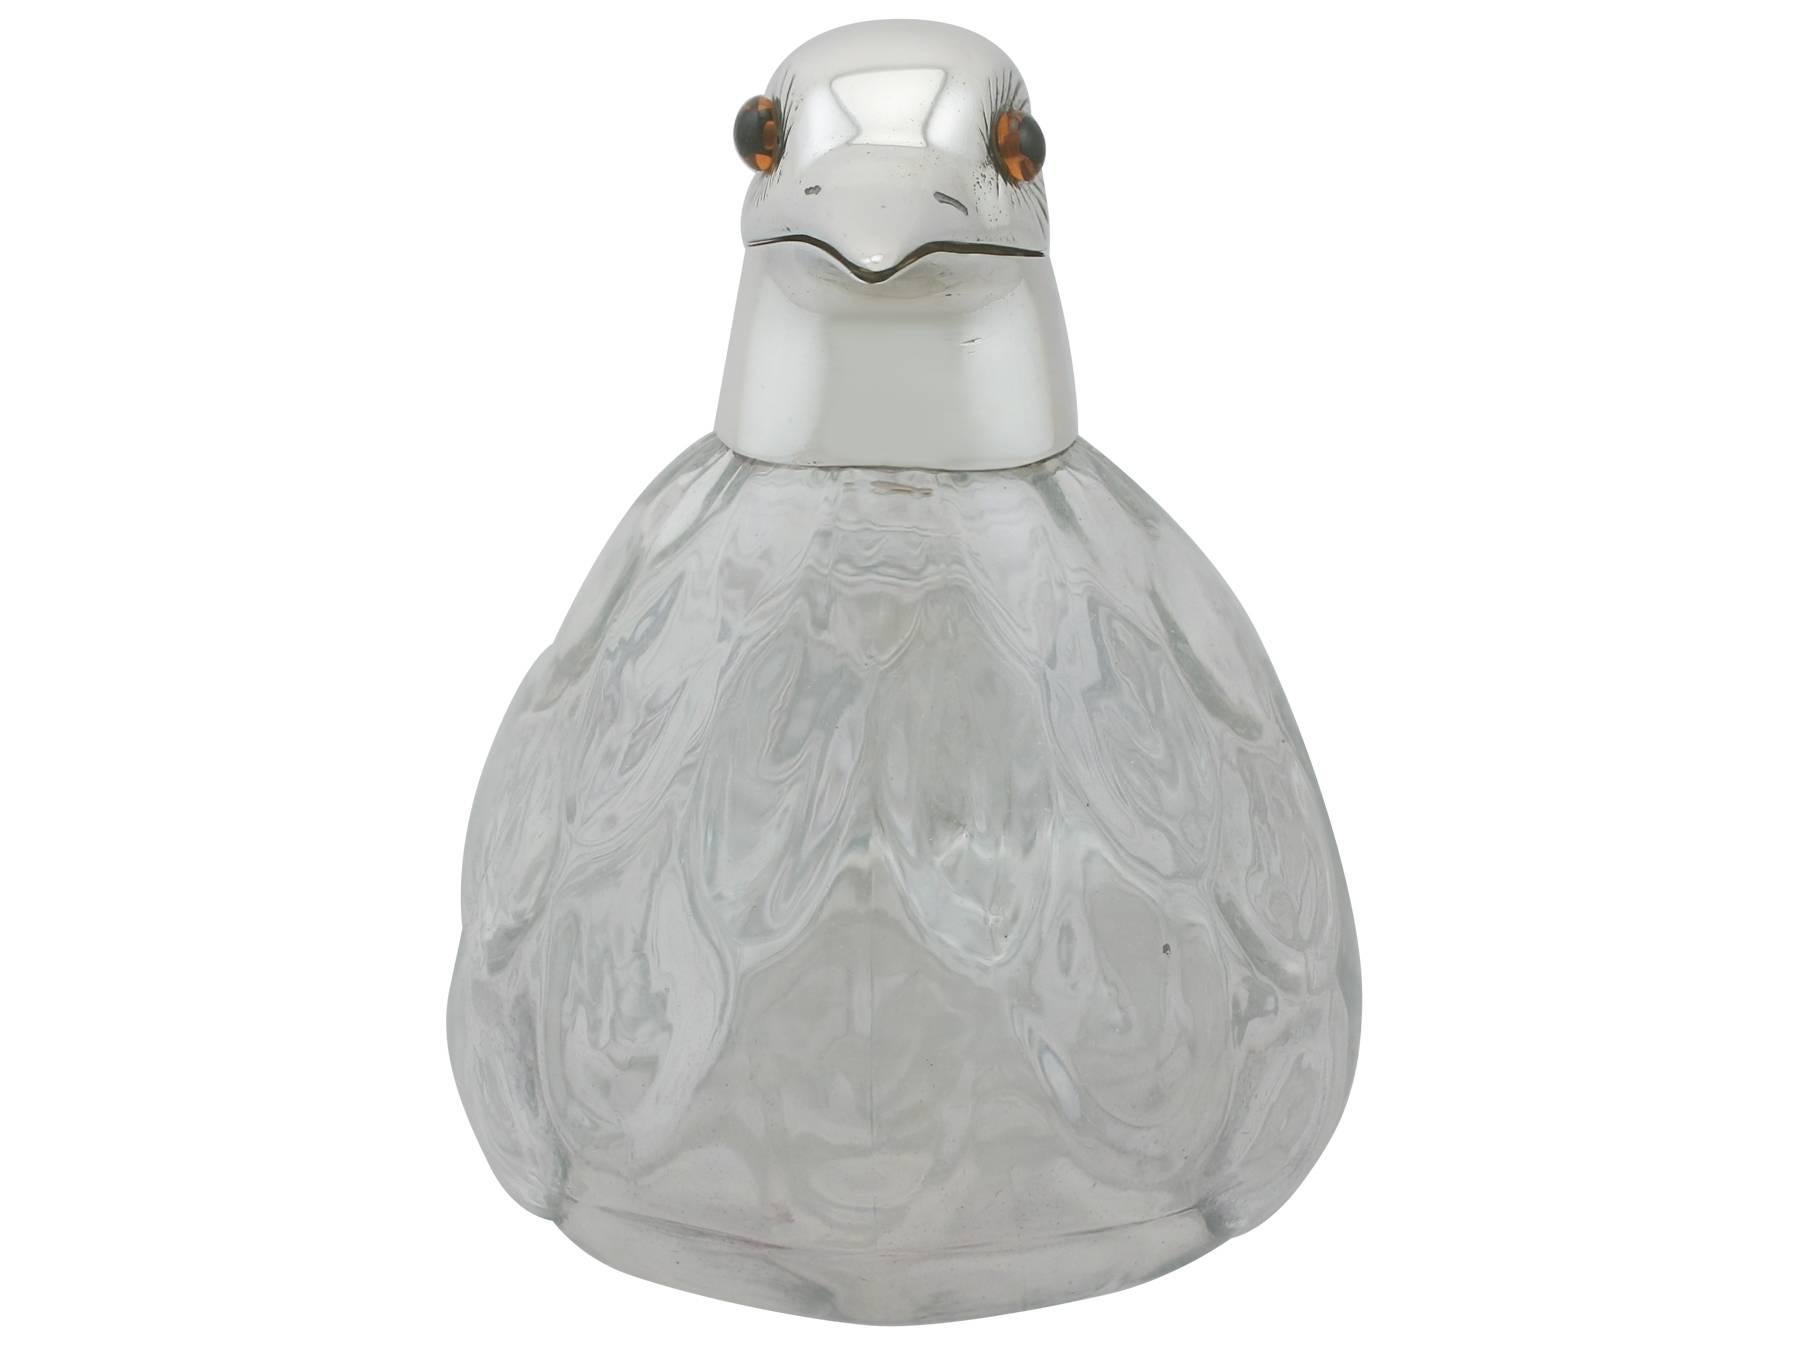 English 1961 Glass and Sterling Silver Mounted Bird Claret Jug by Asprey & Co. Ltd.